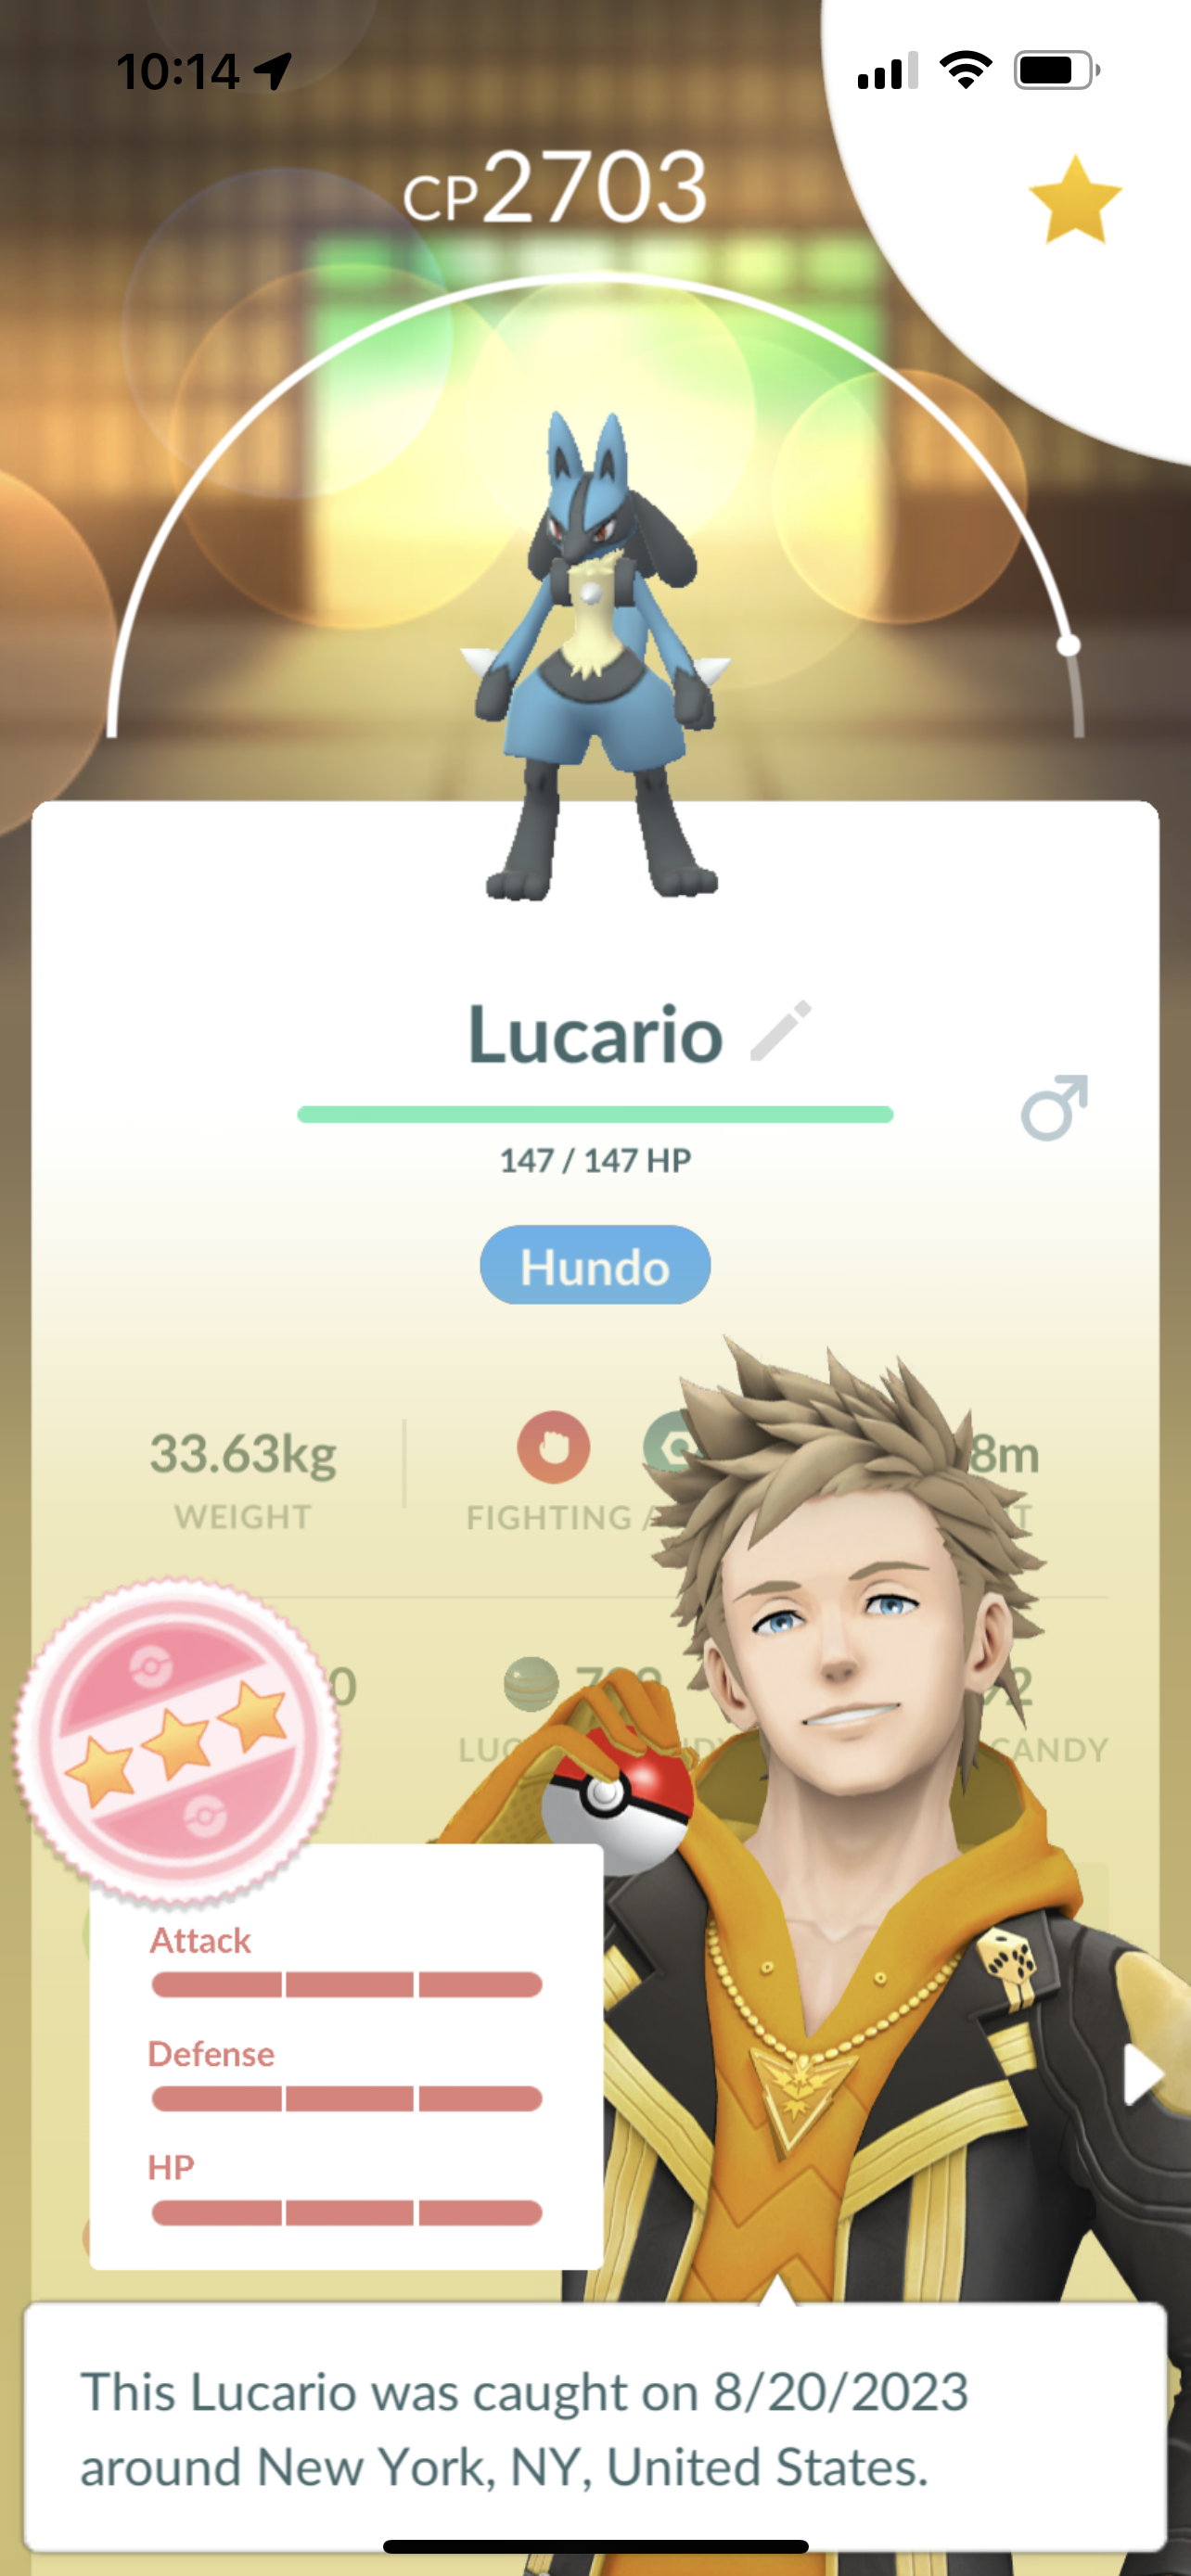 What Is The Best Moveset For Lucario In Pokémon GO?